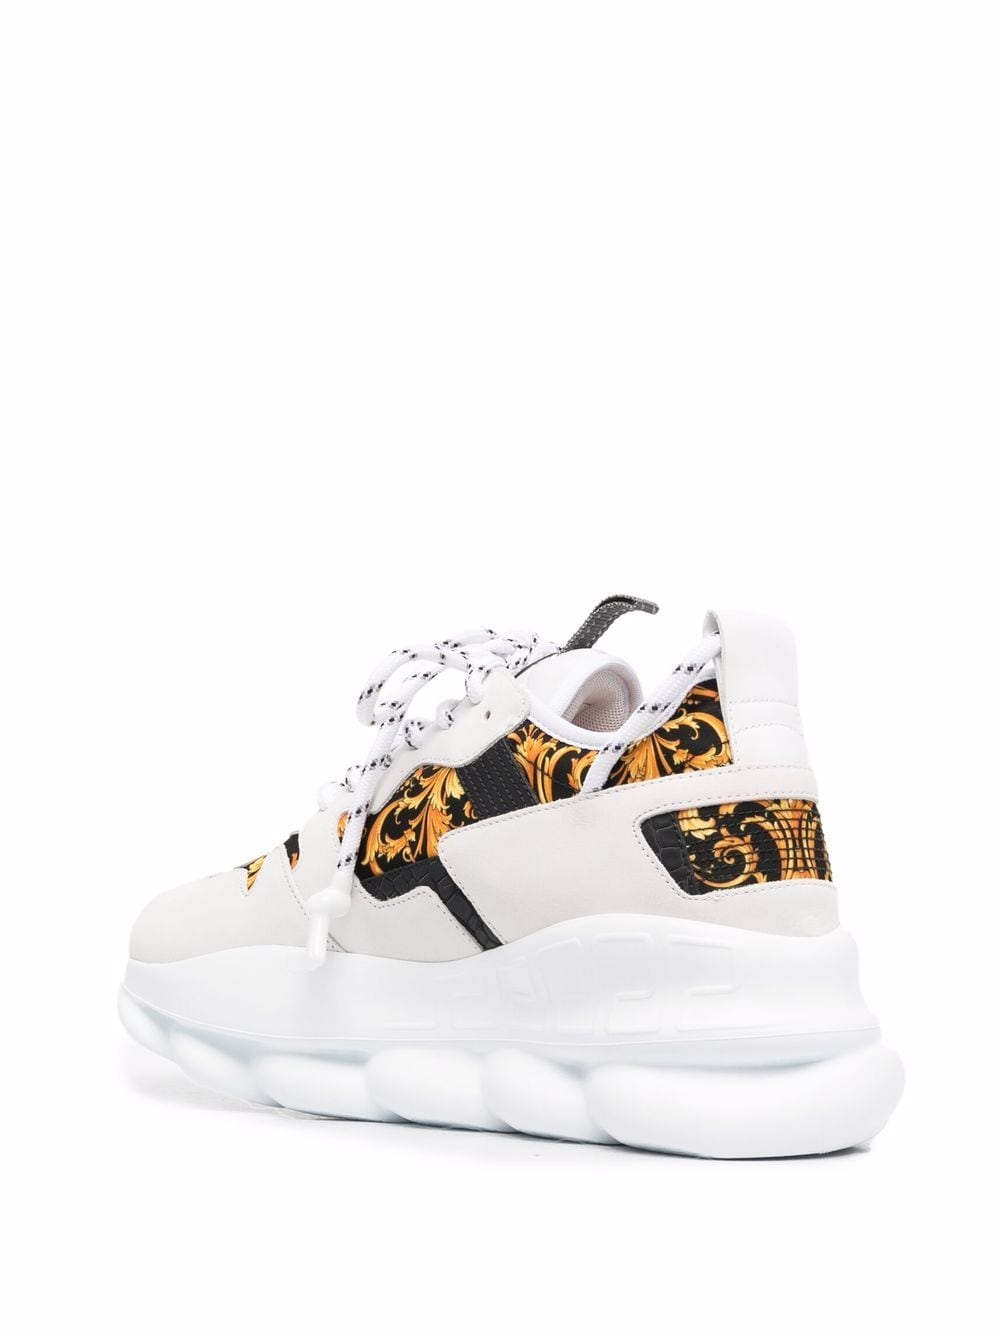 Versace Chain Reaction low-top Sneakers - Farfetch